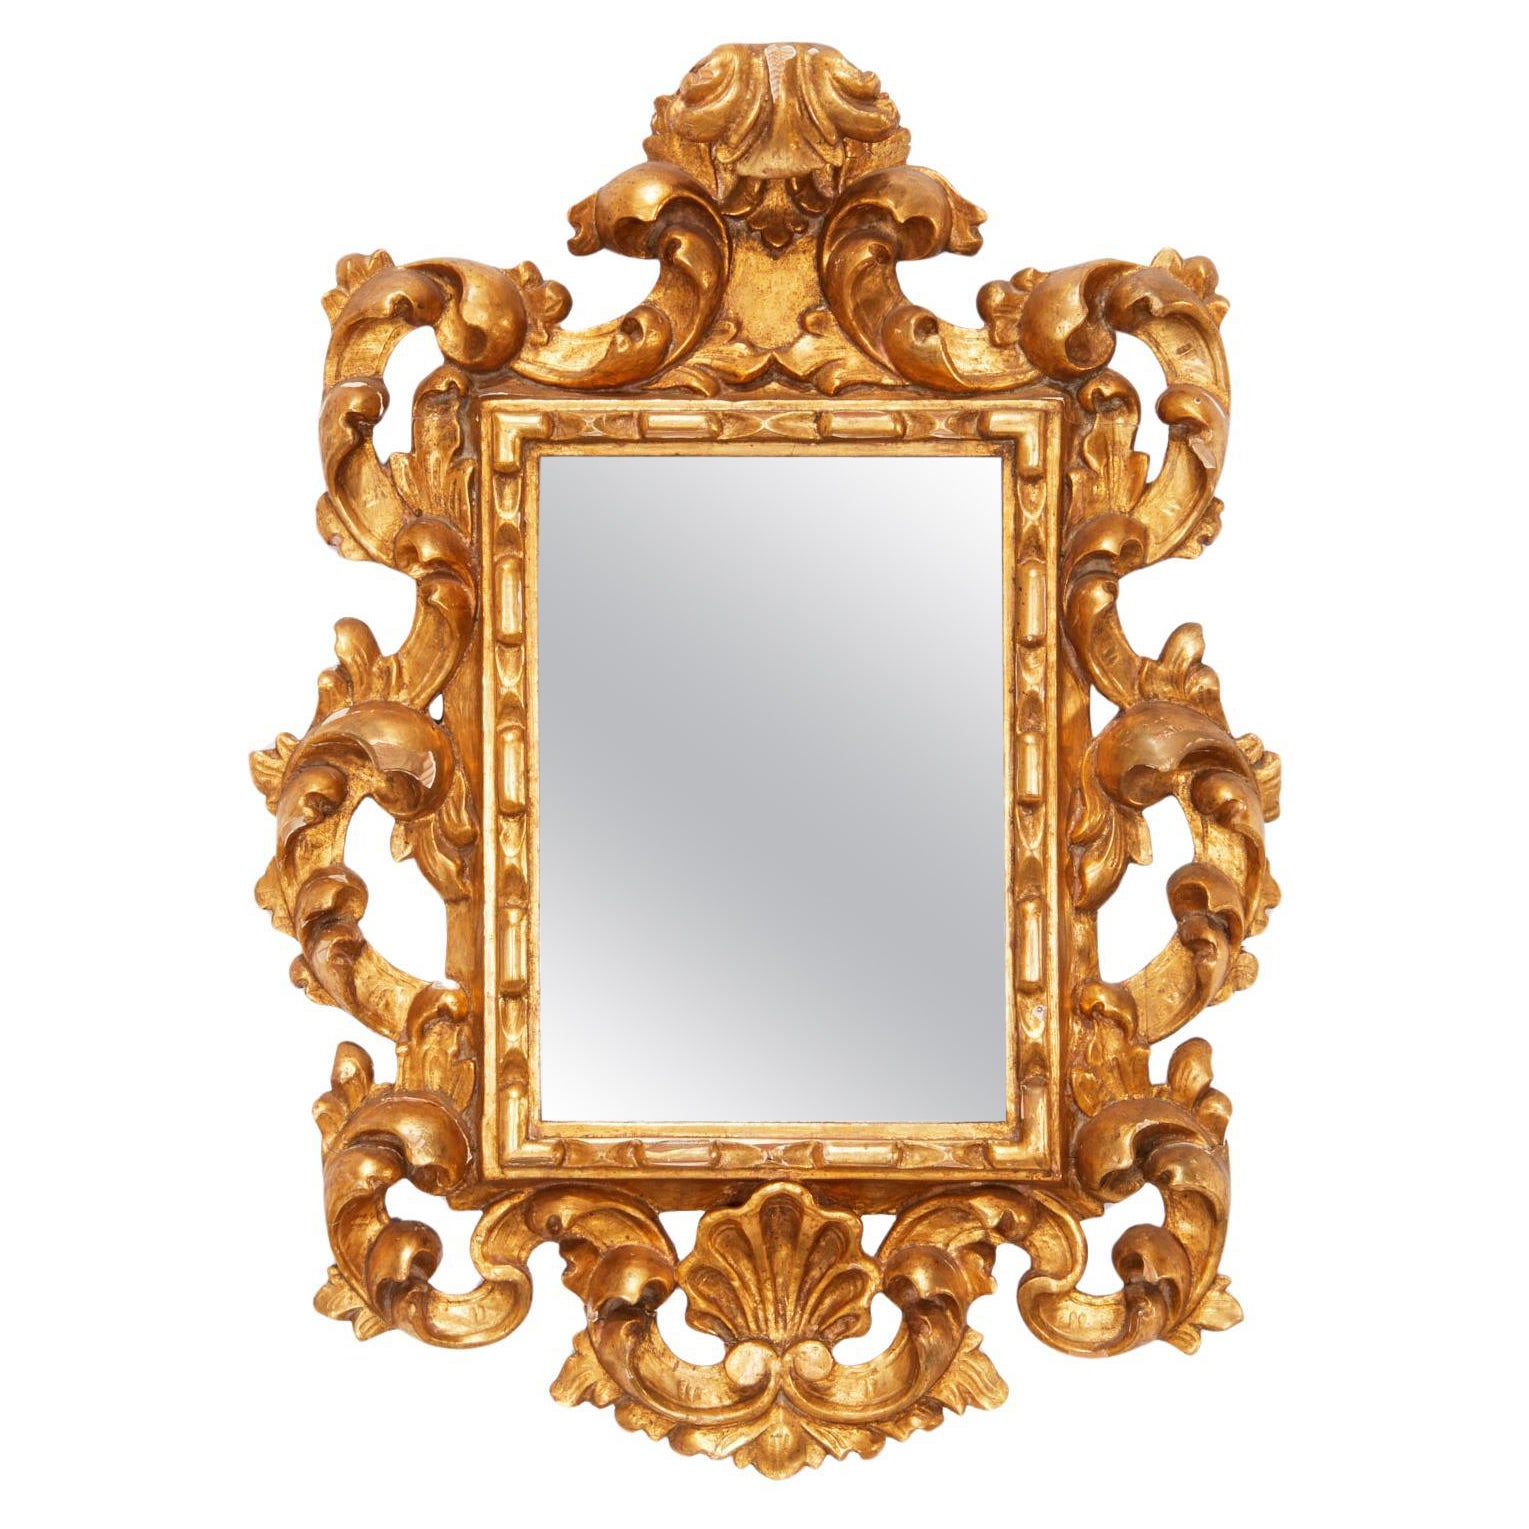 20th c. Spanish Baroque Style Giltwood Mirror With Scrollwork Frame  For Sale